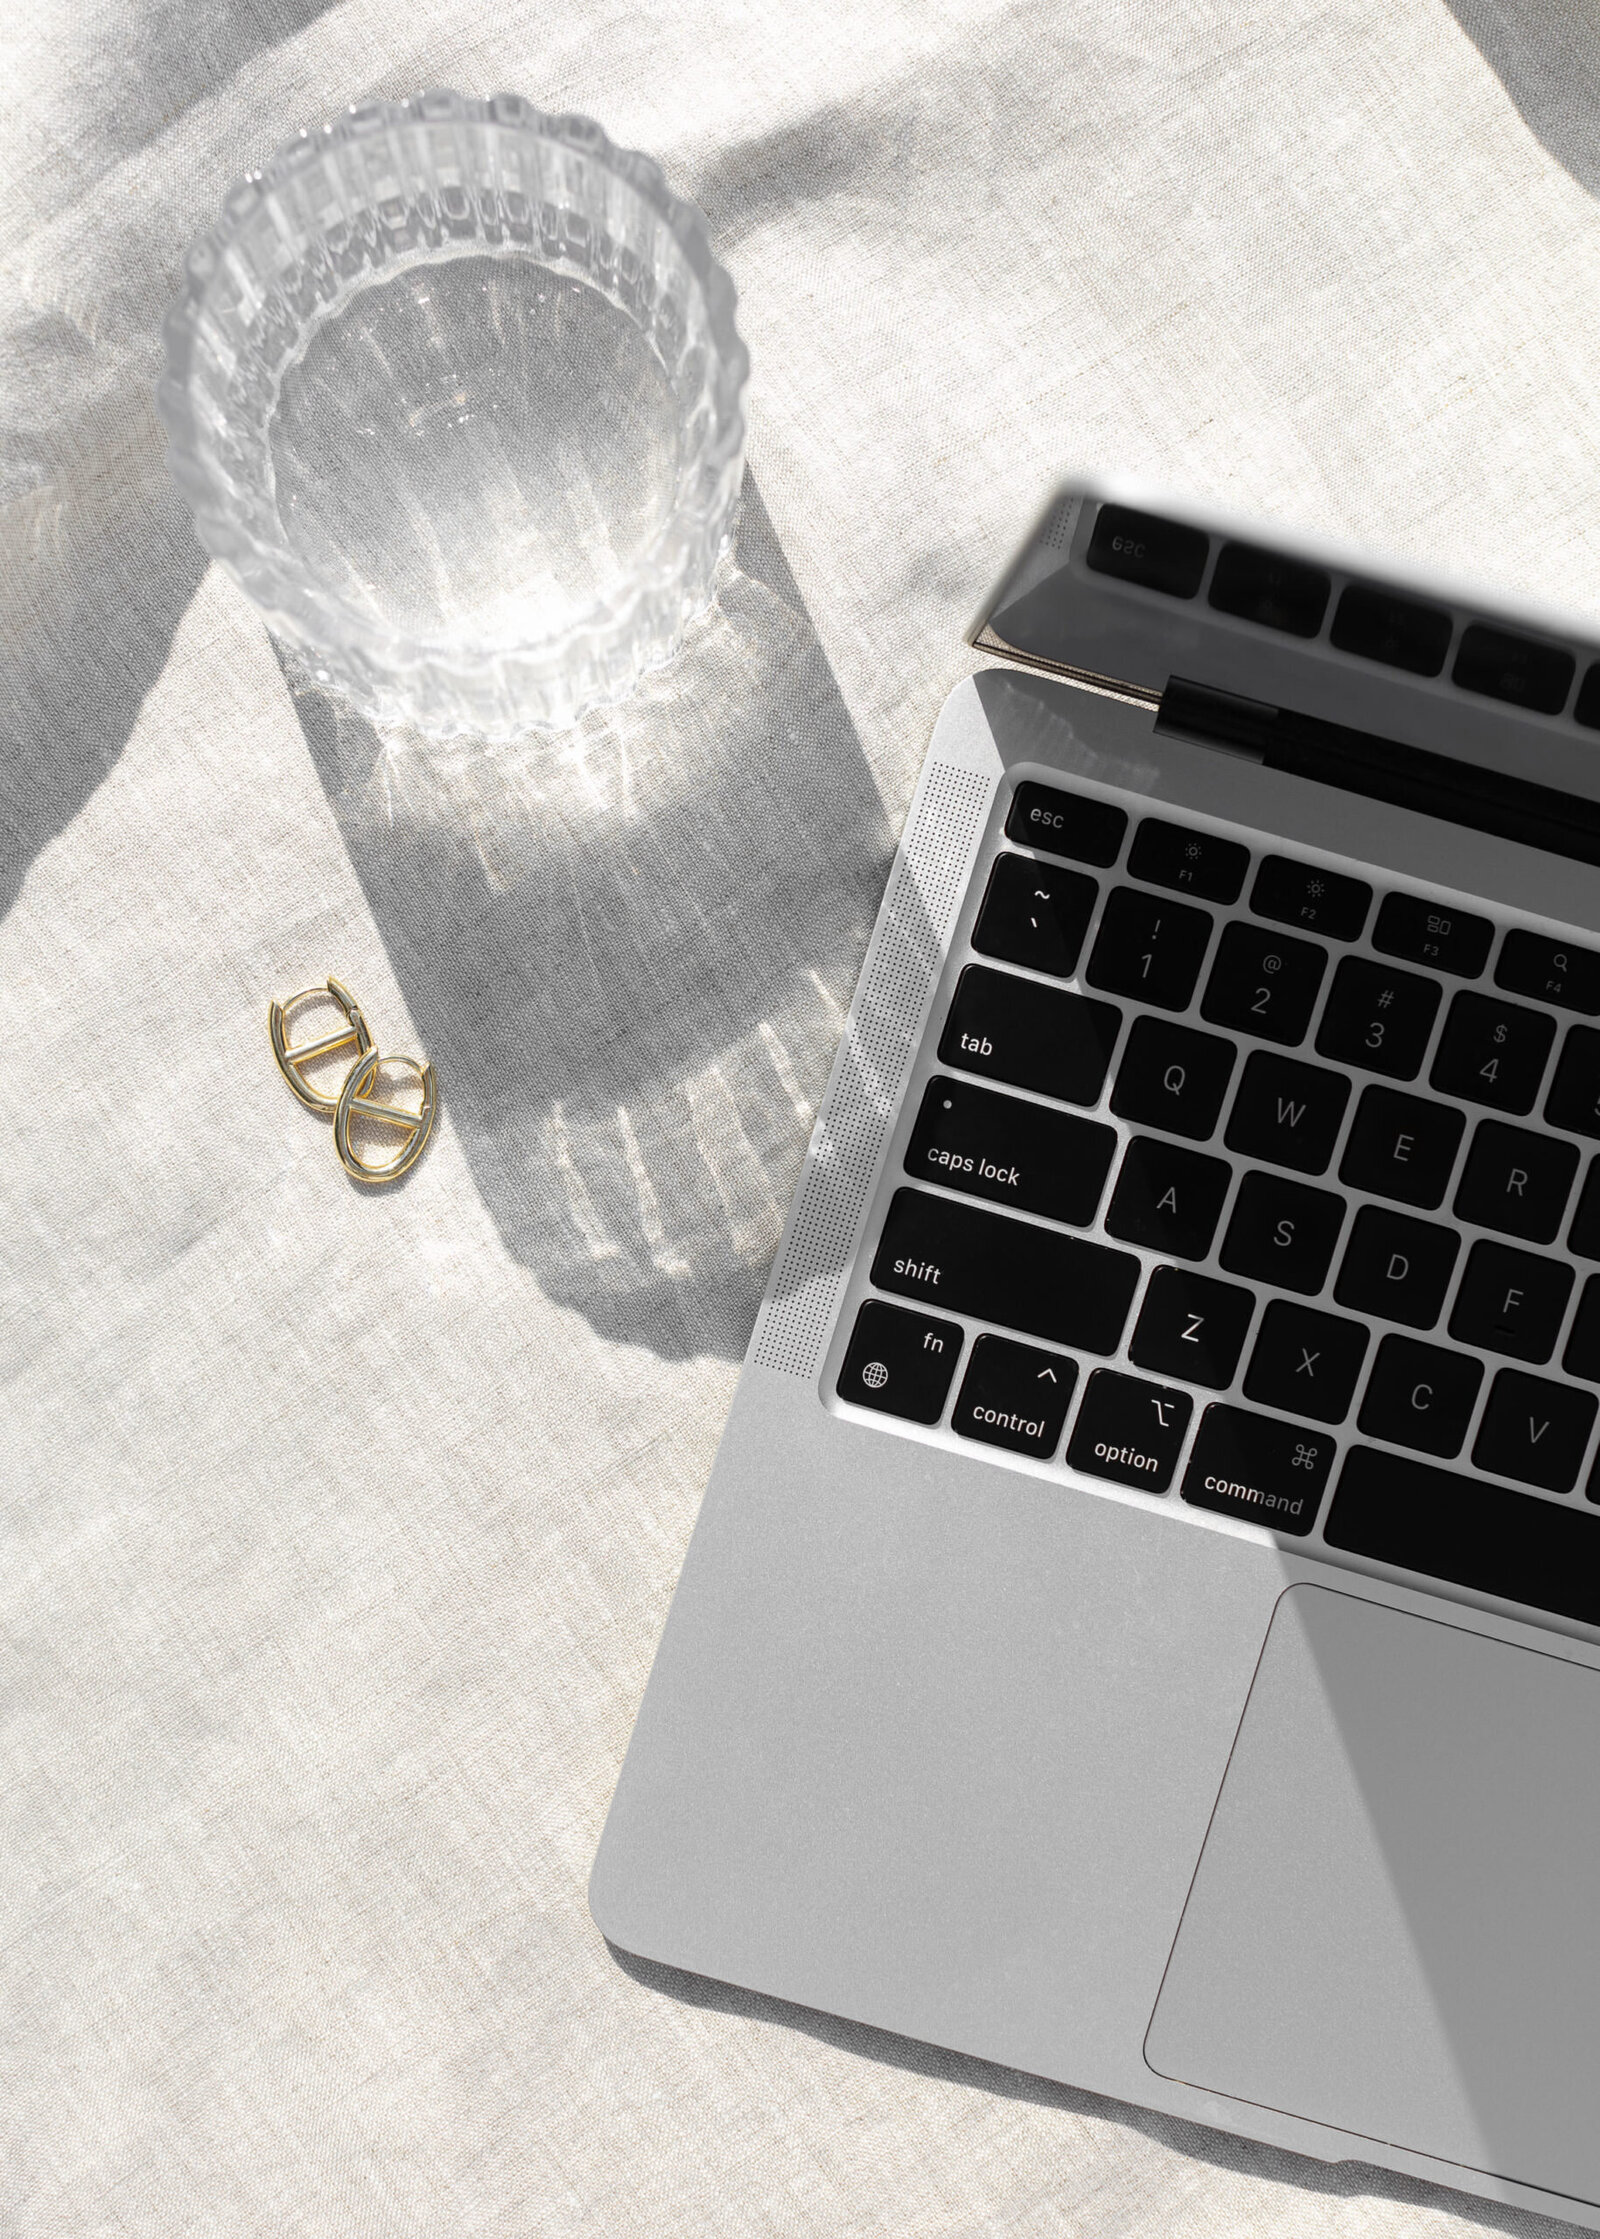 gold earrings next to a laptop with the shadow of a glass over it